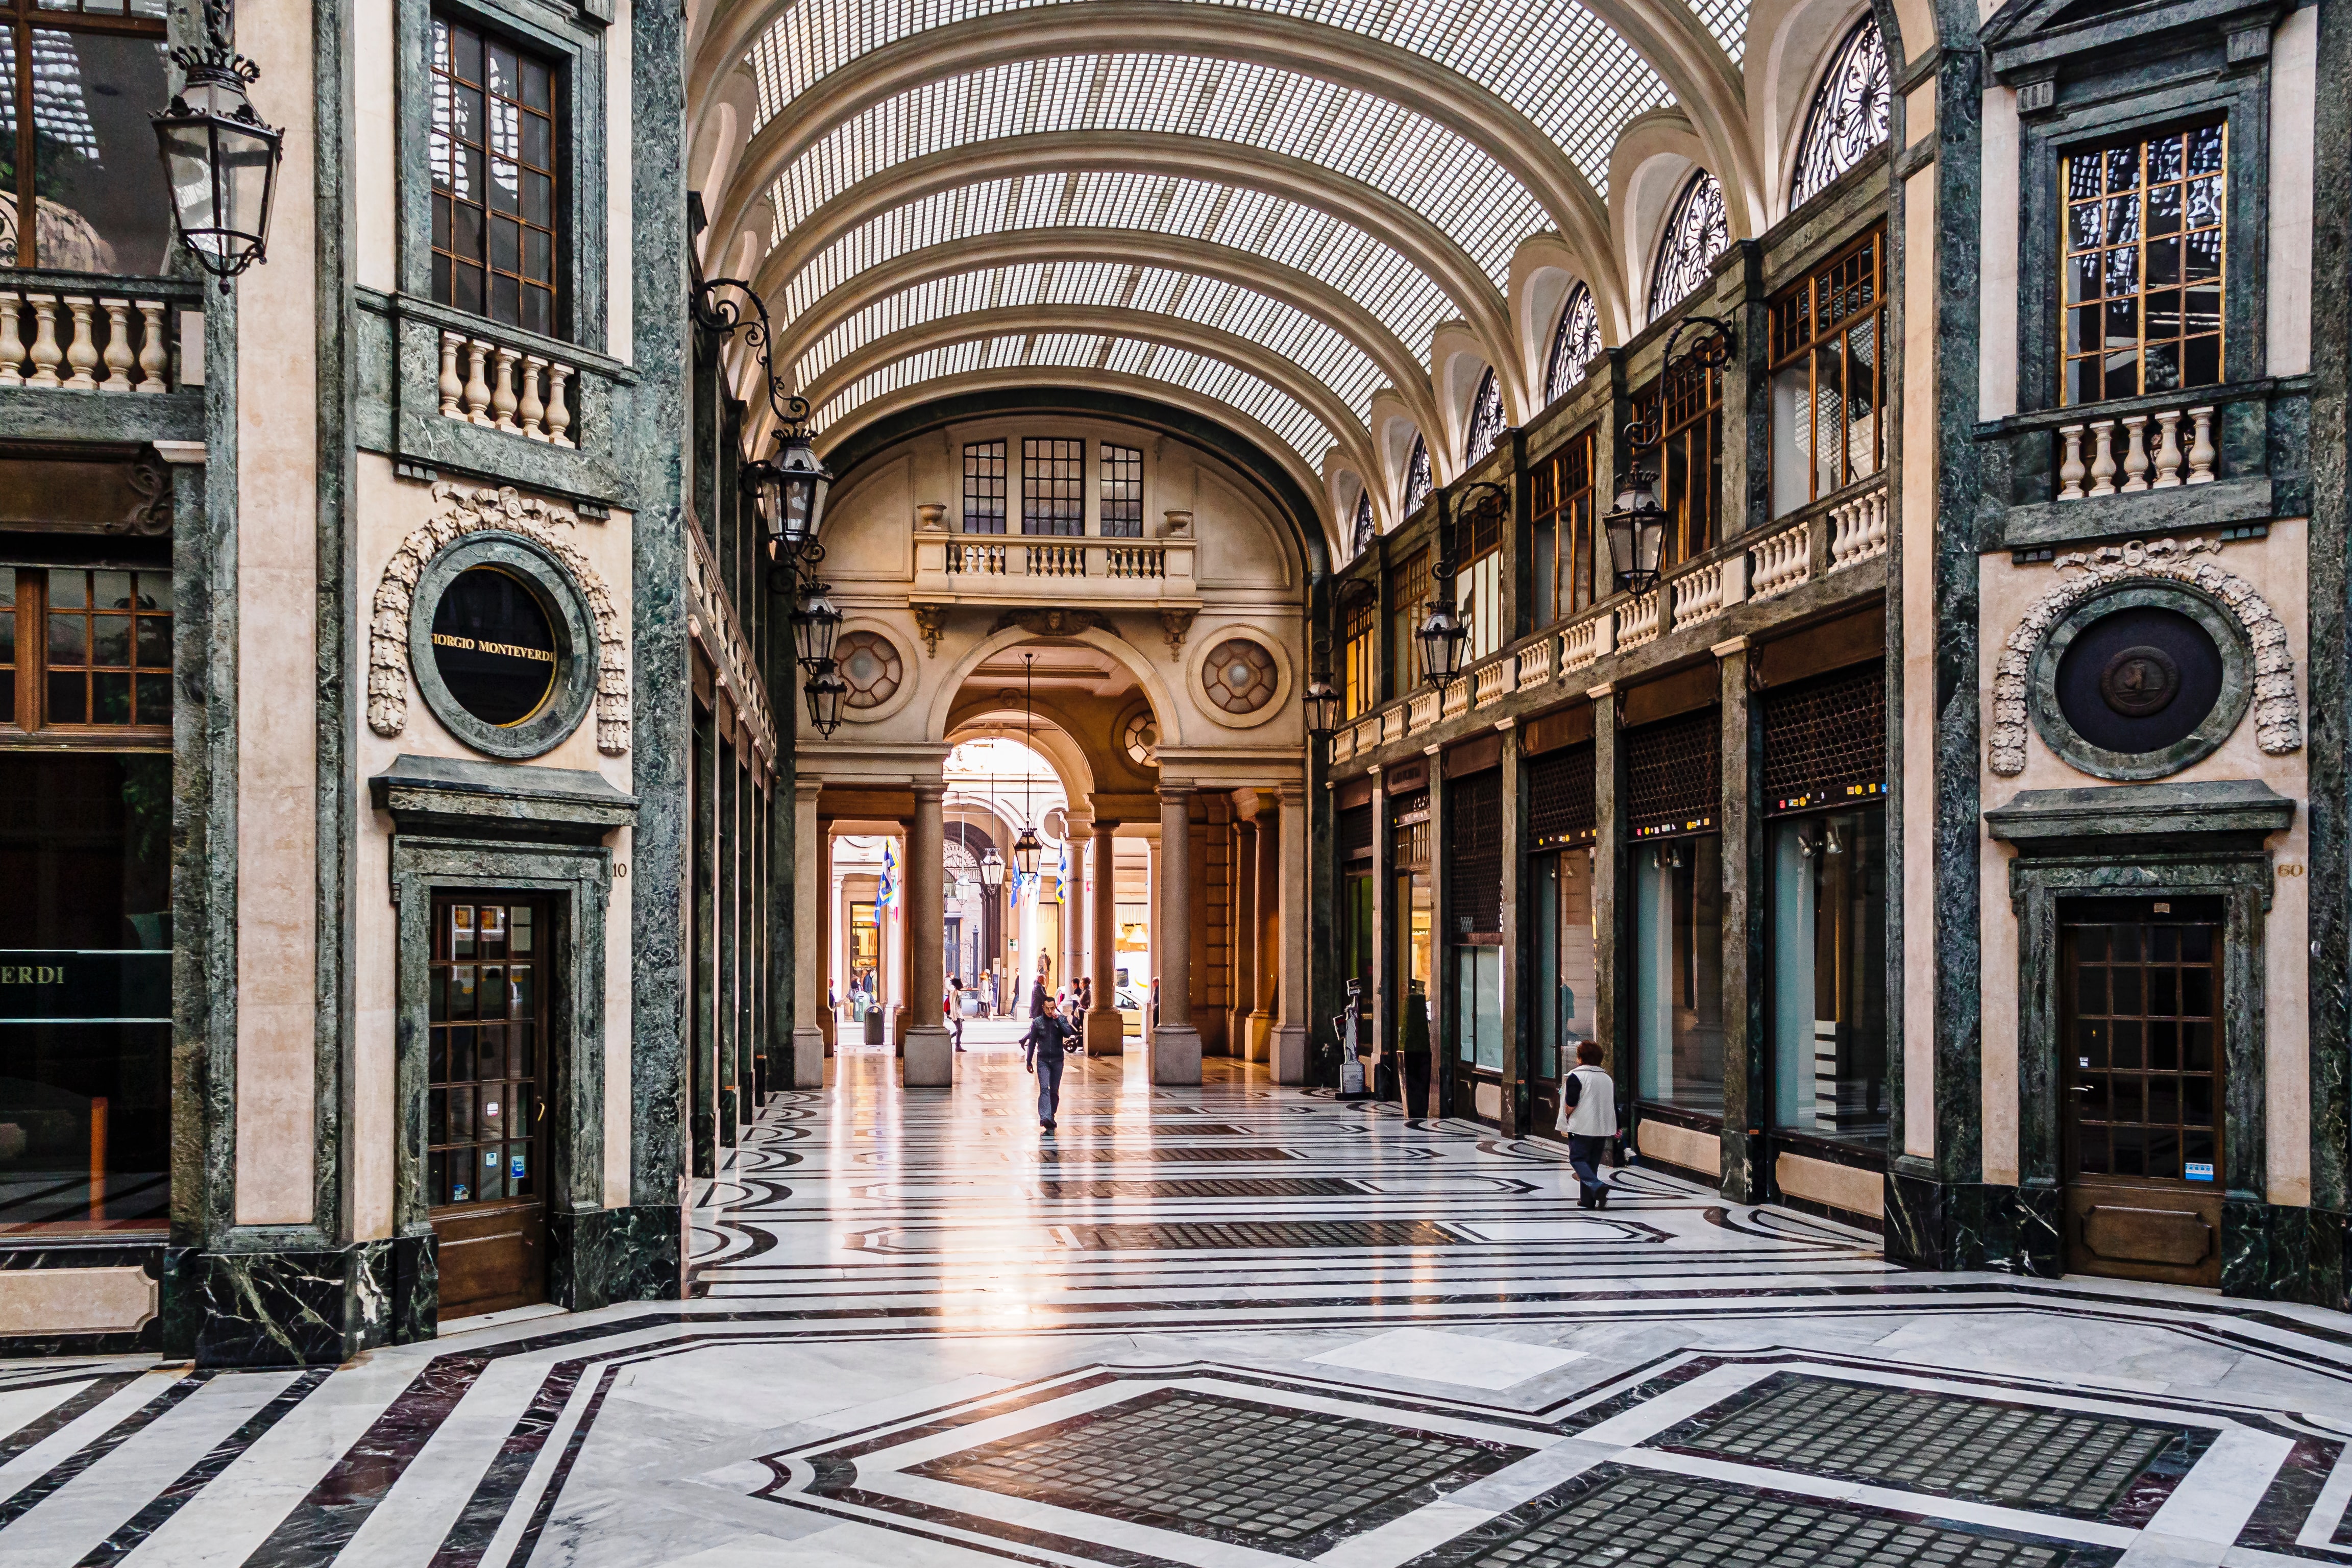 What are the best luxury hotels in Turin? Whether you're visiting Turin for business or pleasure, these luxury hotels provide an unforgettable experience.